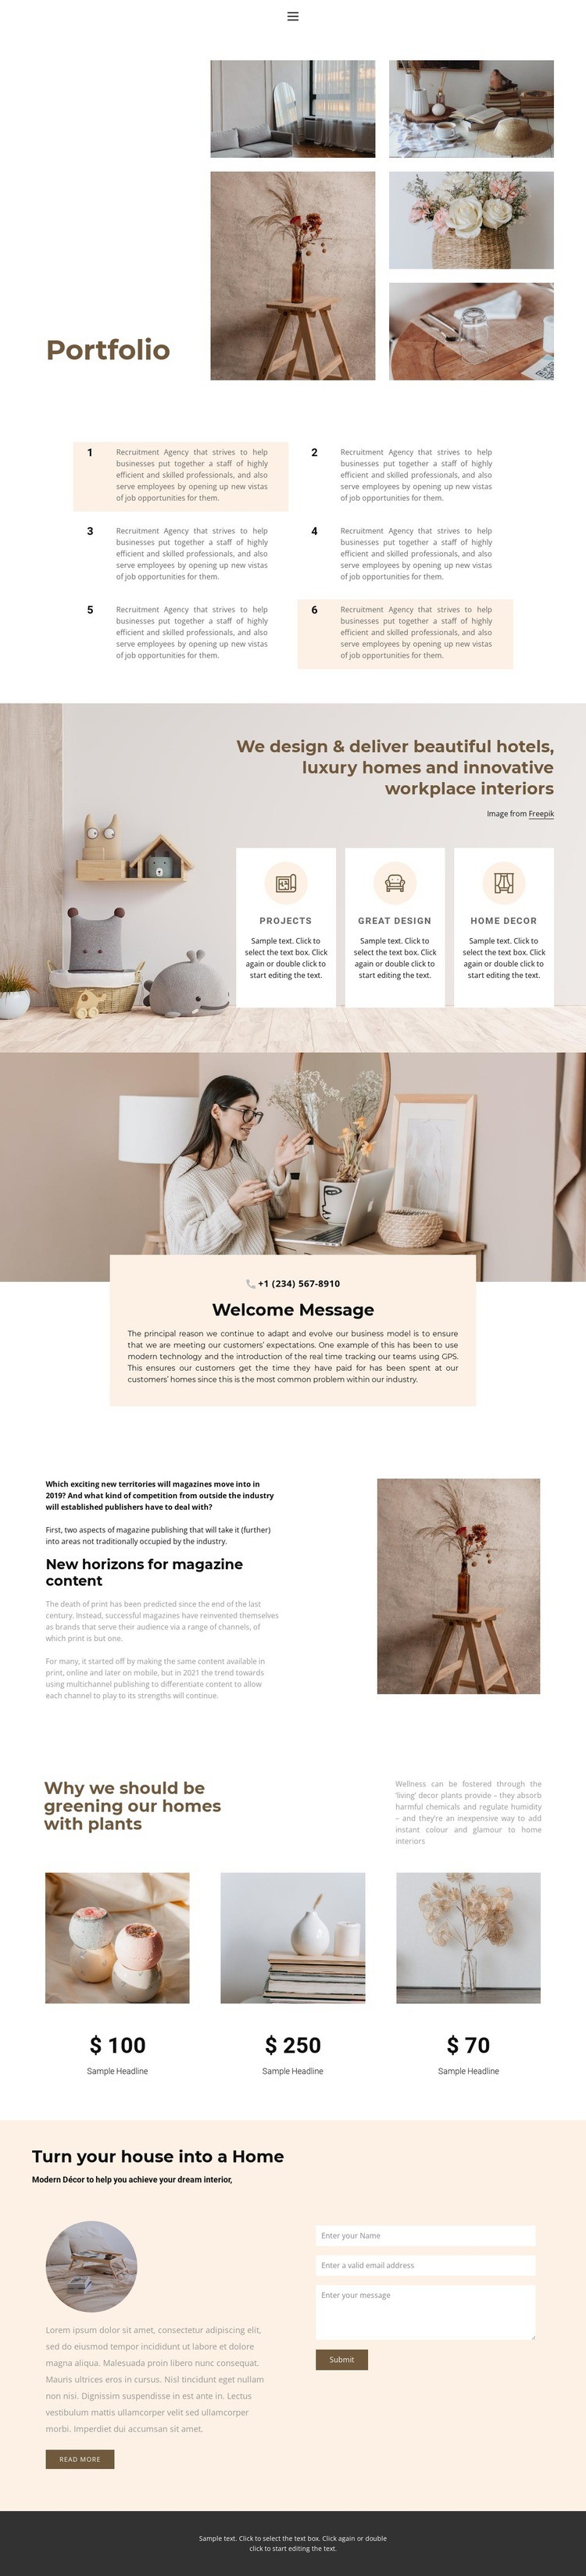 Decorate your home Web Page Design